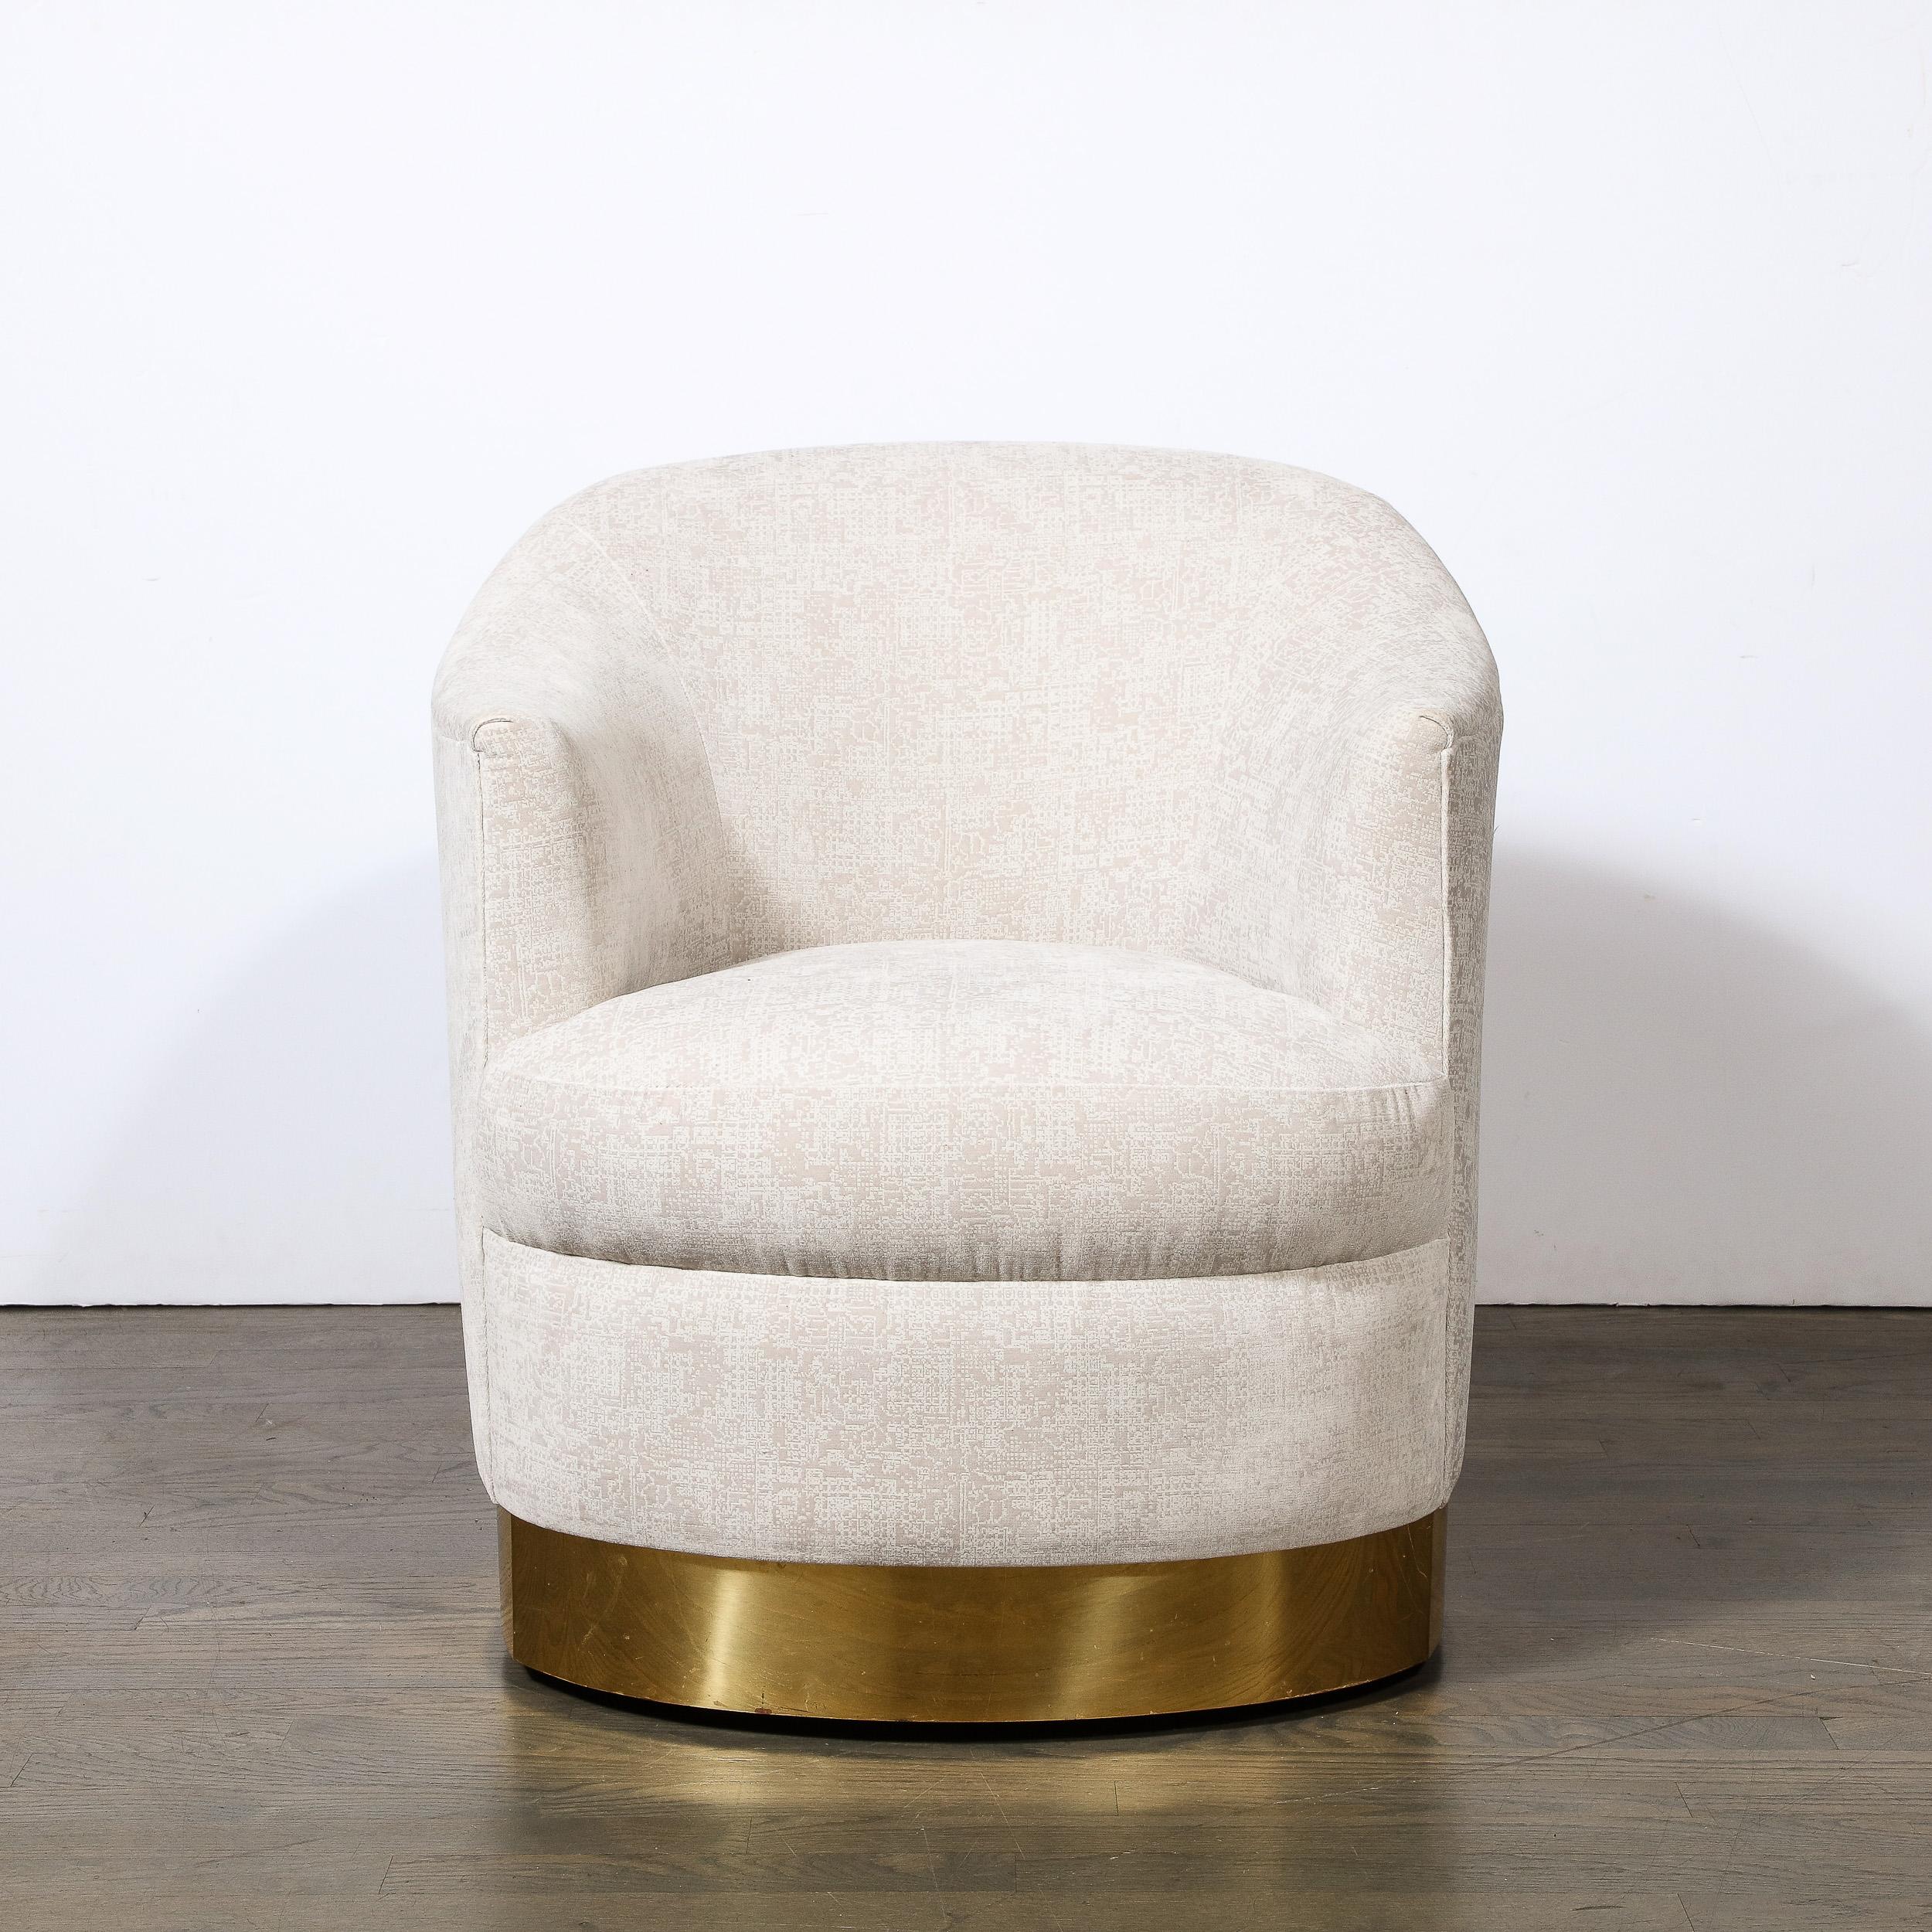 This super luxe  Mid-Century Modern documented Karl Springer swivel club chair was realized in the United States circa 1985. It offers a sculptural body- full of interesting curvilinear angles with Holly Hunt upholstery sitting on a circular